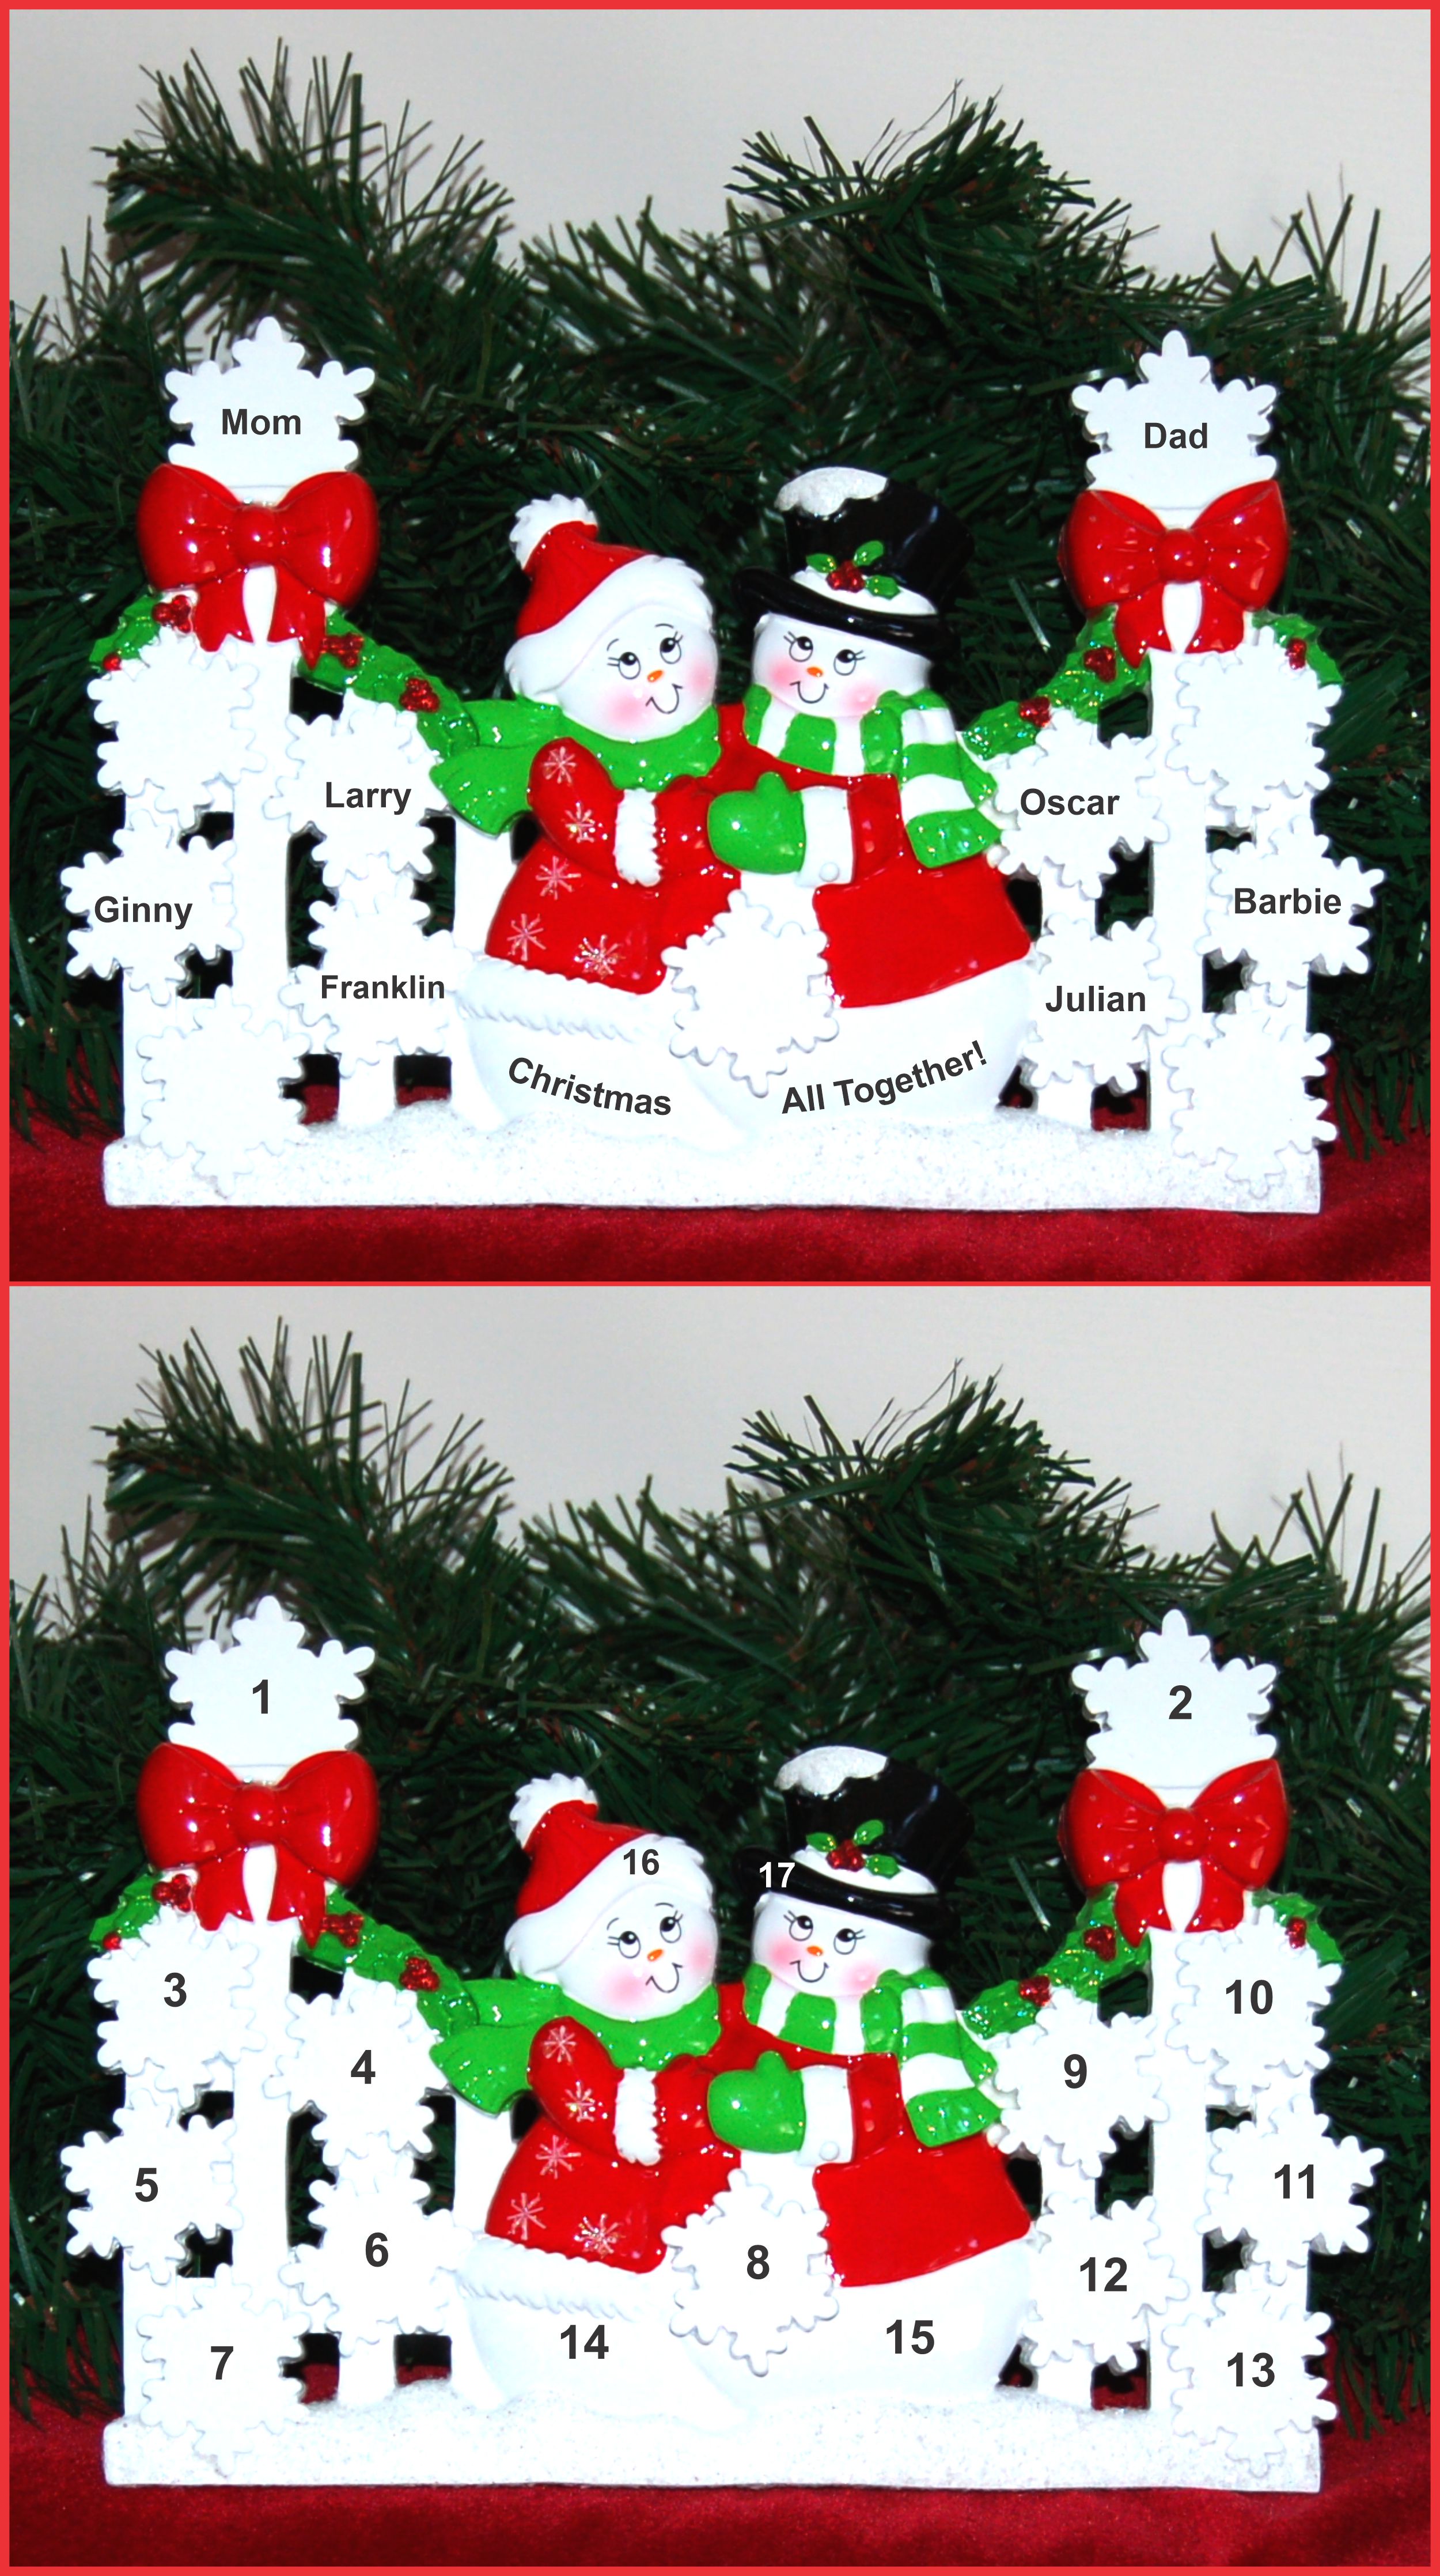 Tabletop Christmas Decoration Snowflakes Family of 8 Personalized by RussellRhodes.com